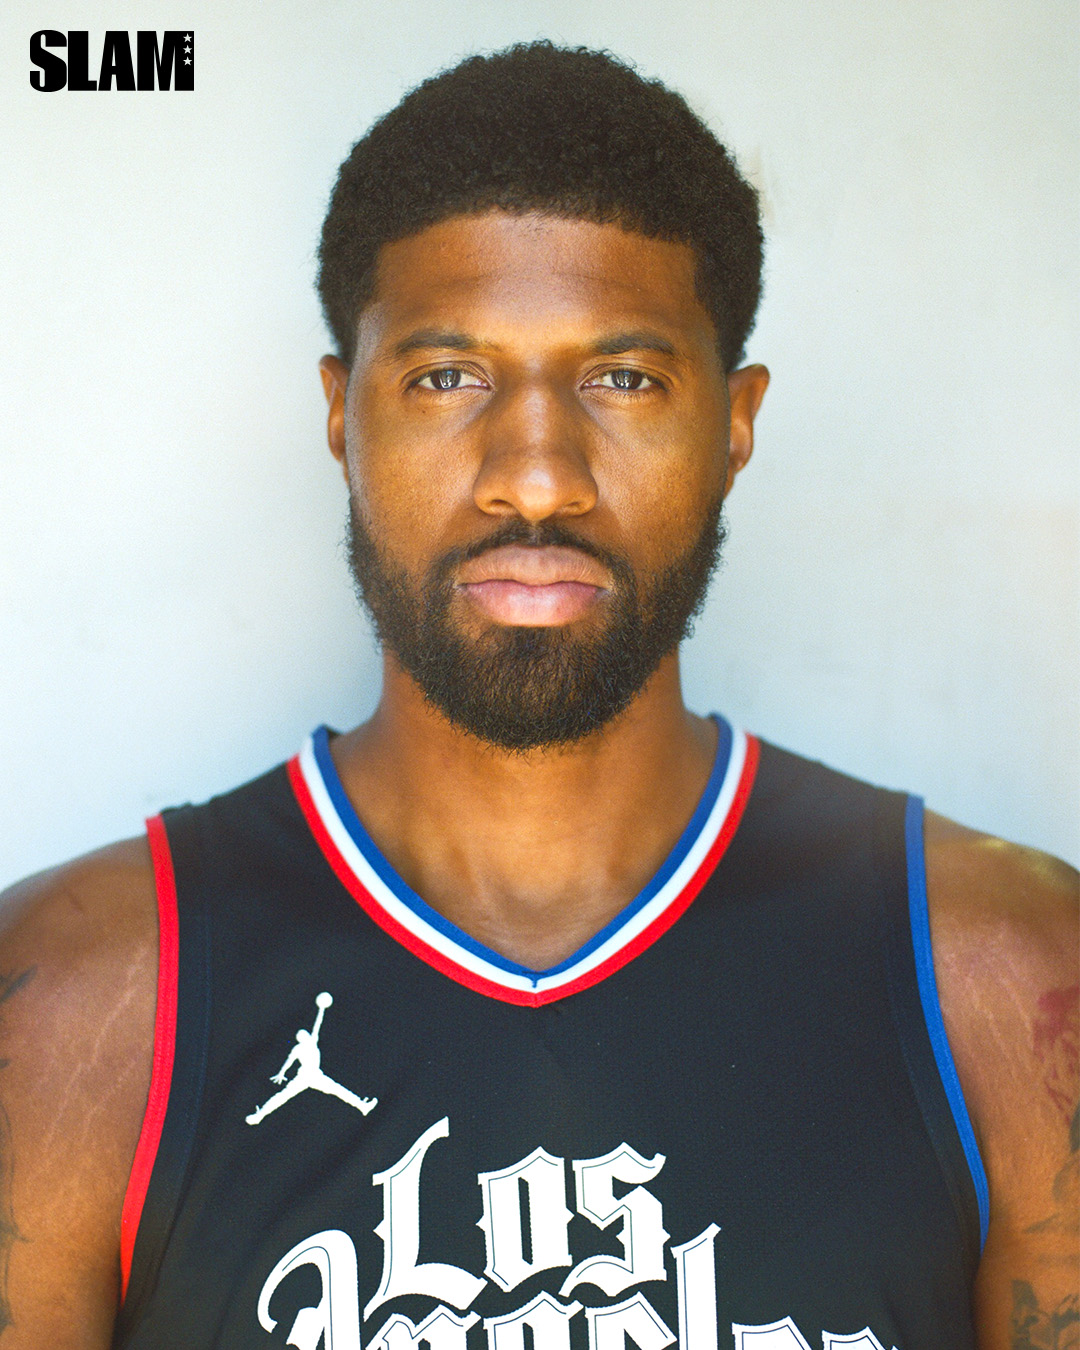 Paul George Unfiltered: Clippers Star Talks Training, Perception Around the NBA and Destroying the Competition